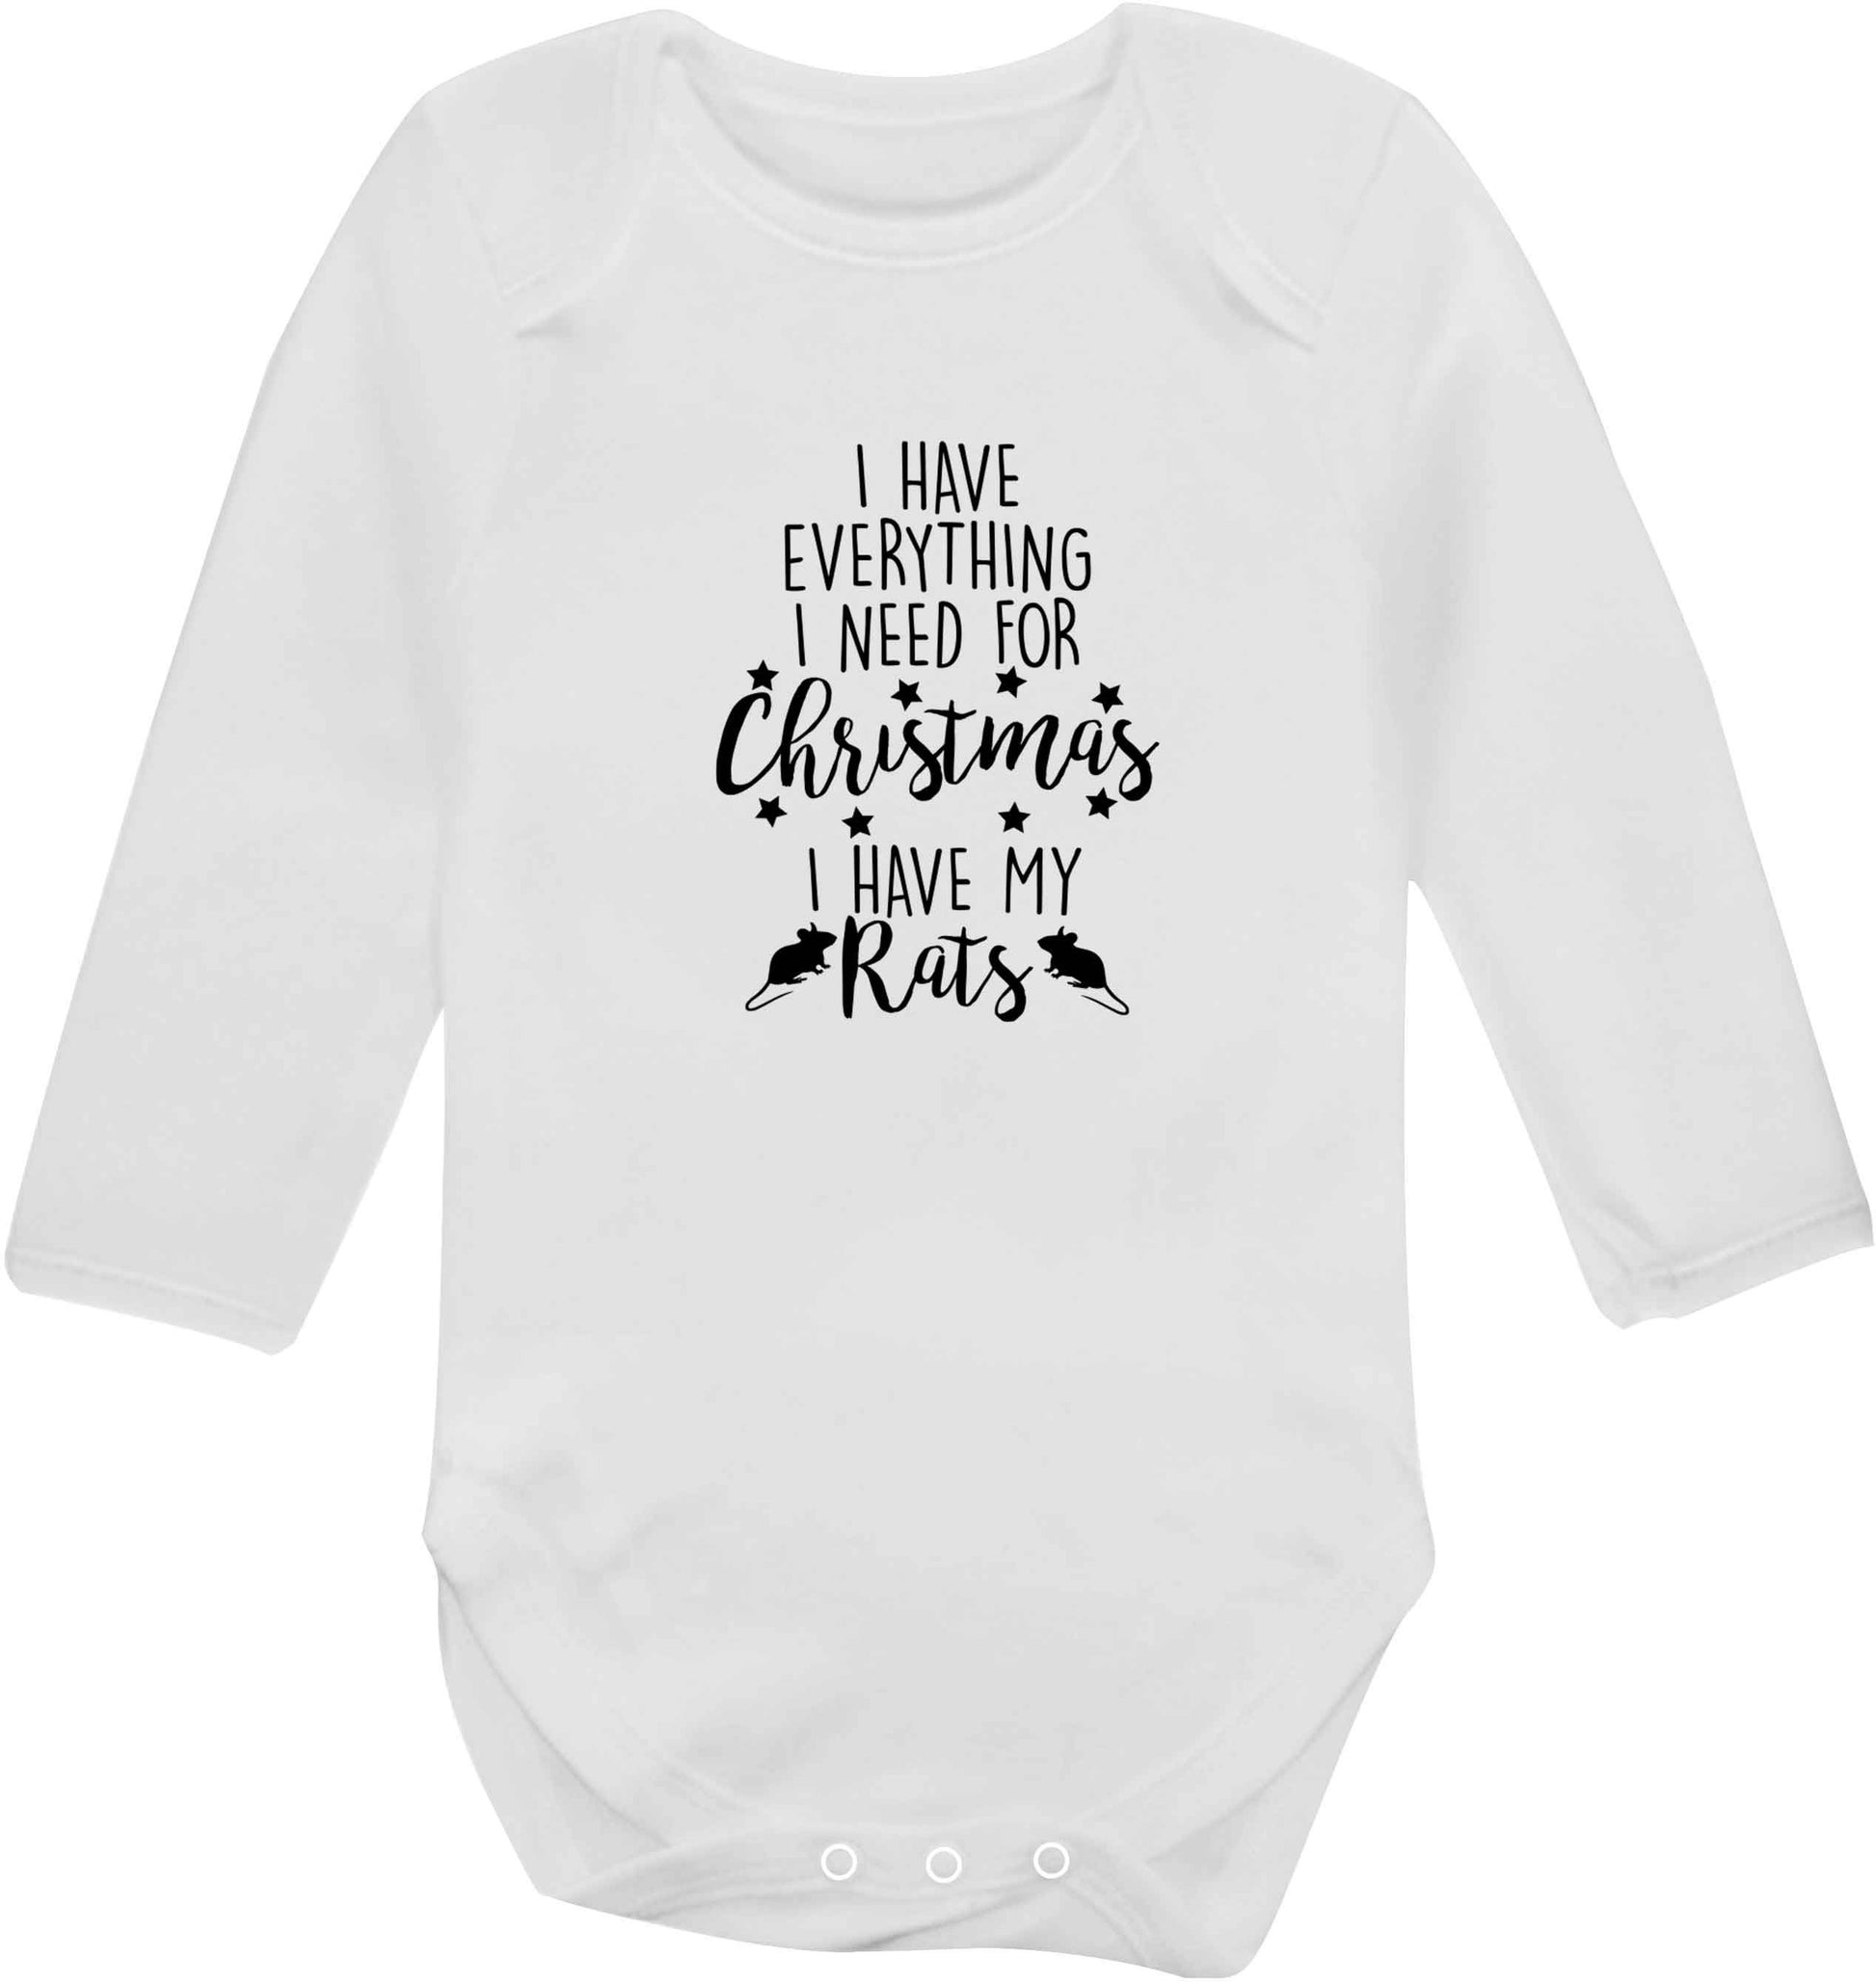 I have everything I need for Christmas I have my rats baby vest long sleeved white 6-12 months